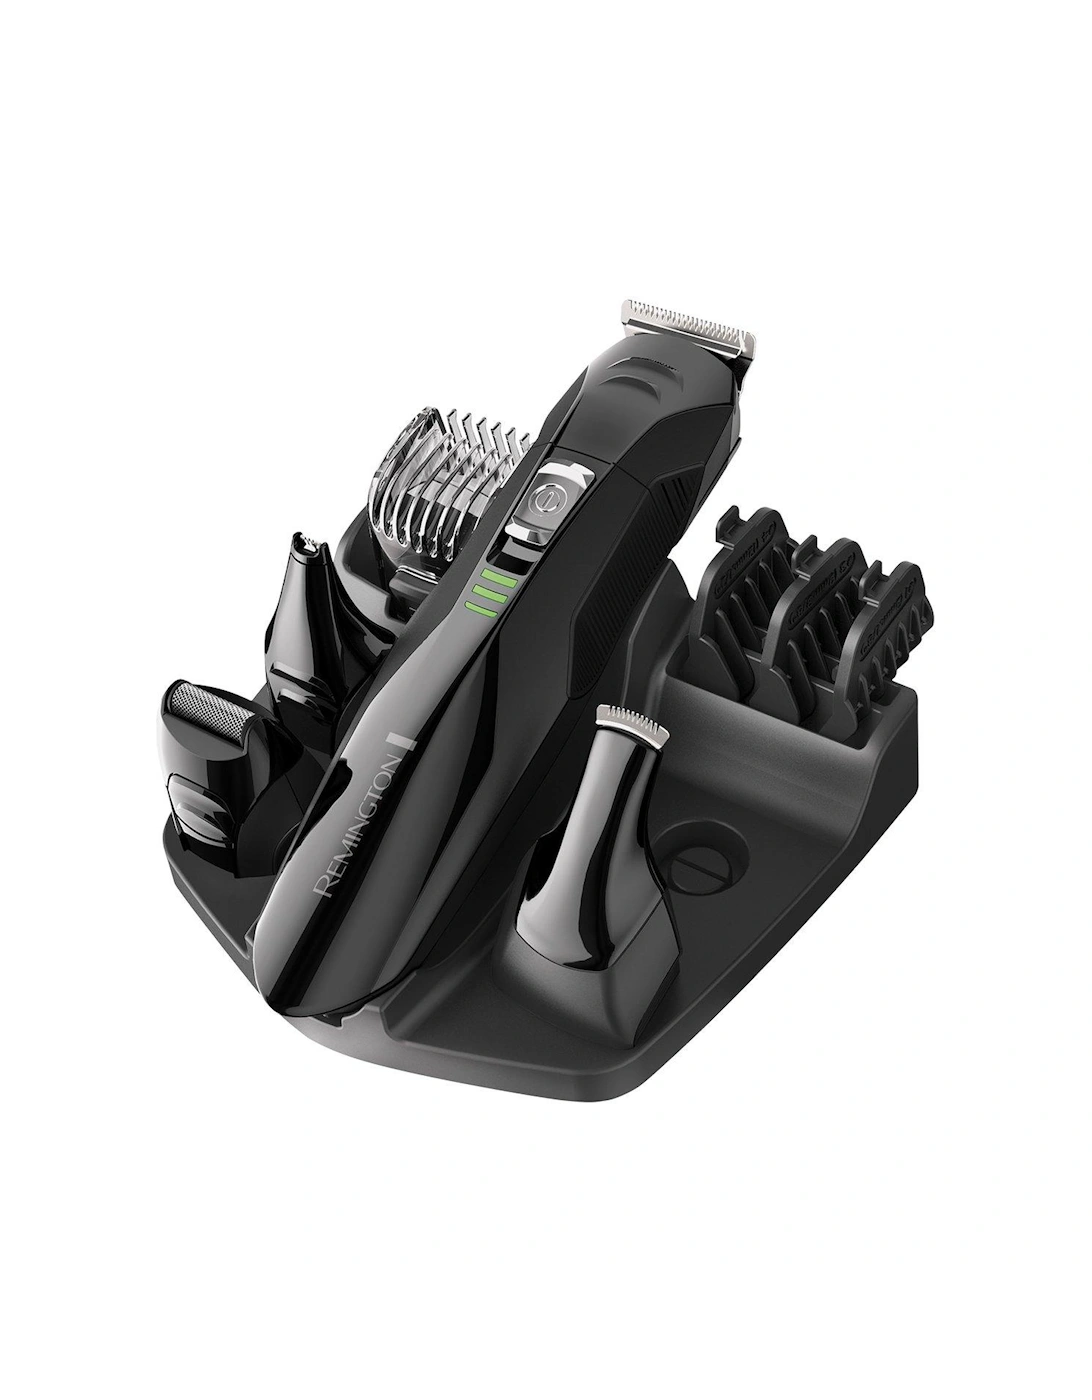 All-in-One Grooming Kit, 2 of 1